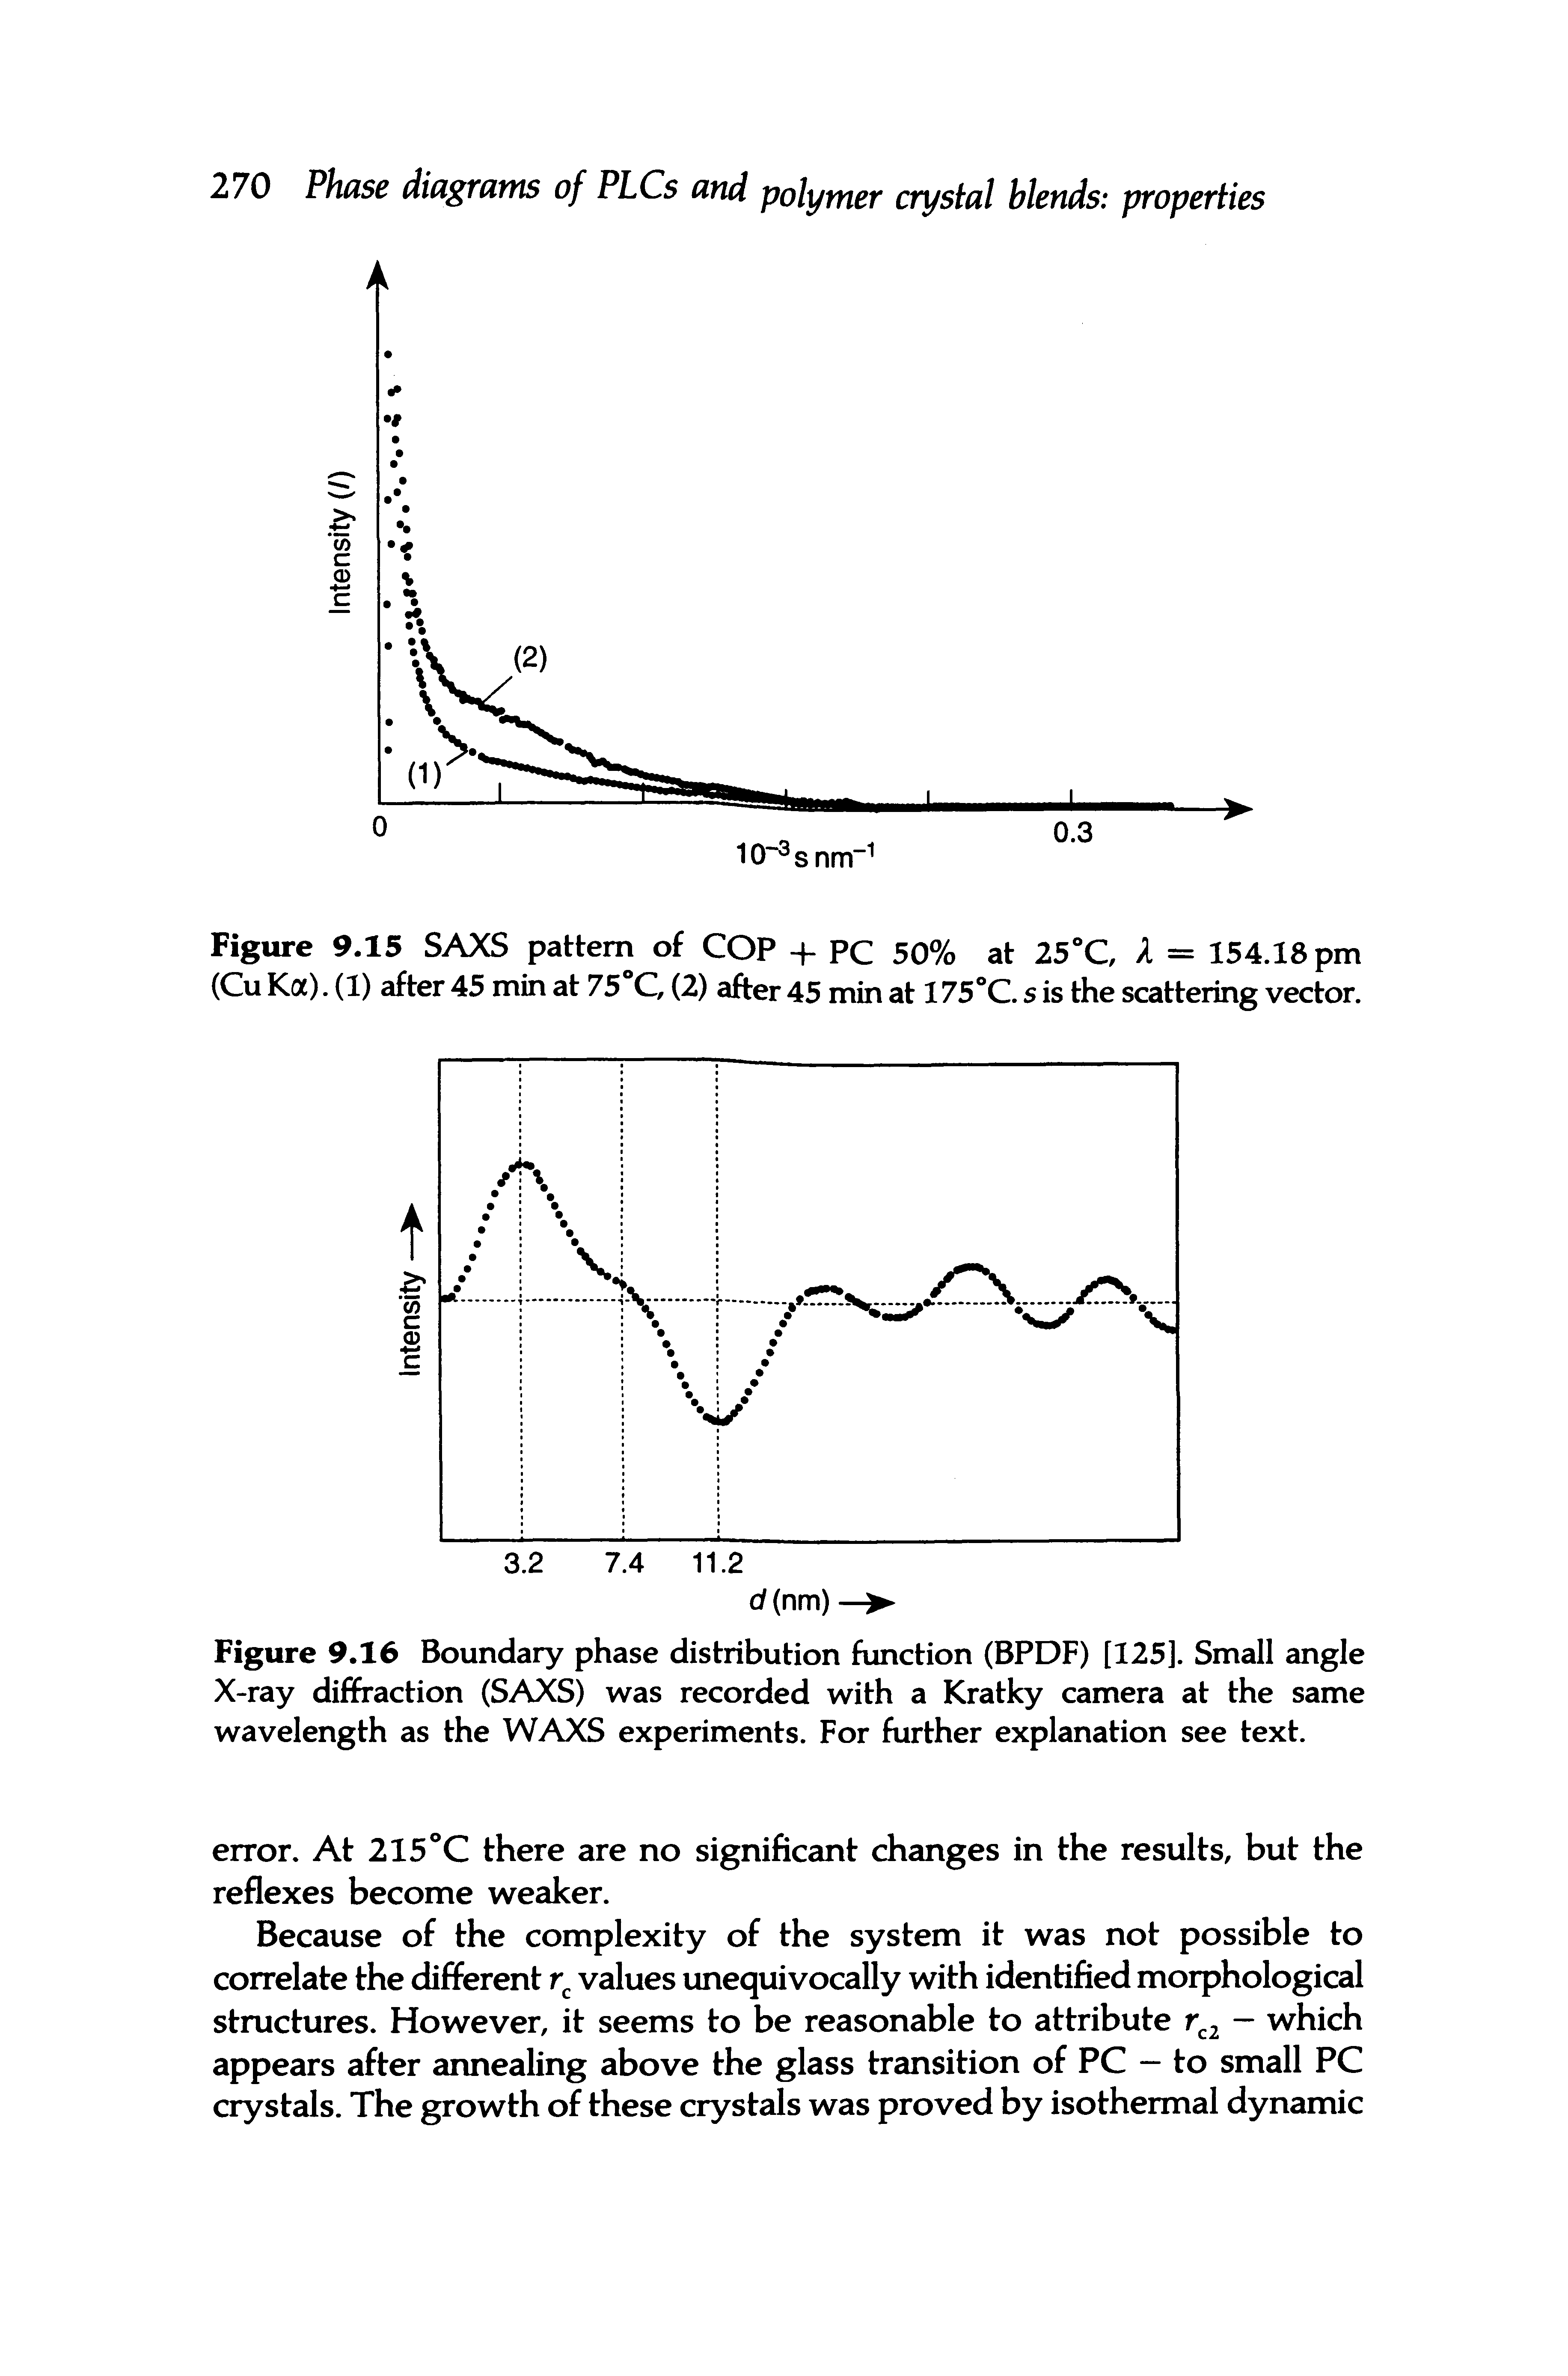 Figure 9.16 Boundary phase distribution function (BPDF) [125]. Small angle X-ray diffraction (SAXS) was recorded with a Kratky camera at the same wavelength as the WAXS experiments. For further explanation see text.